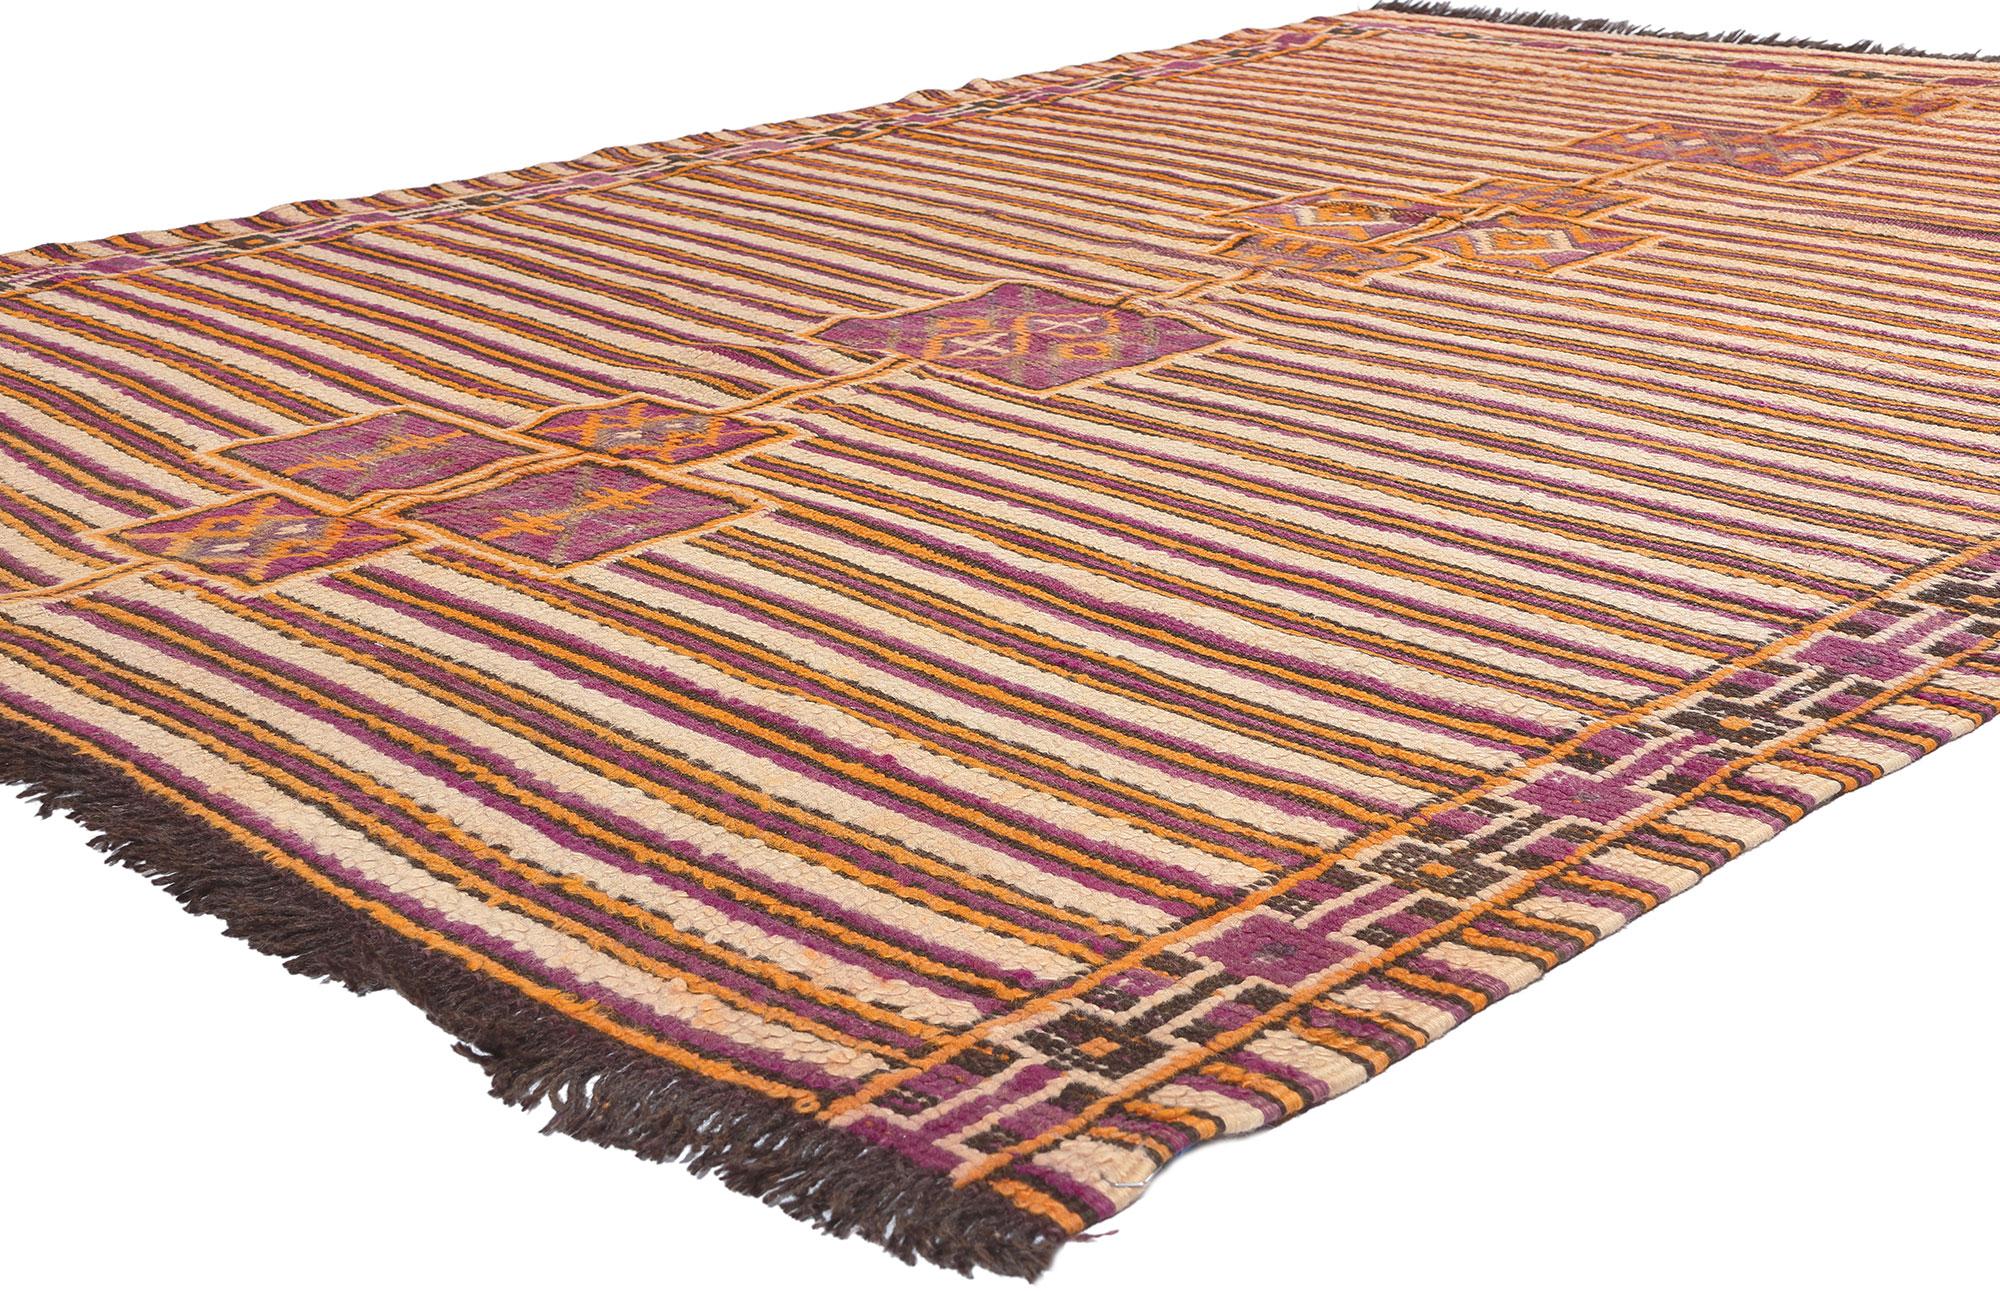 20175 Vintage Talsint Moroccan Rug, 06'01 x 09'00. From the heart of the Figuig province, where the Ait Bou Ichaouen tribe weaves its vibrant tales, emerges the Talsint Moroccan rug, named after the rural town of Talsint in Northeastern Morocco,